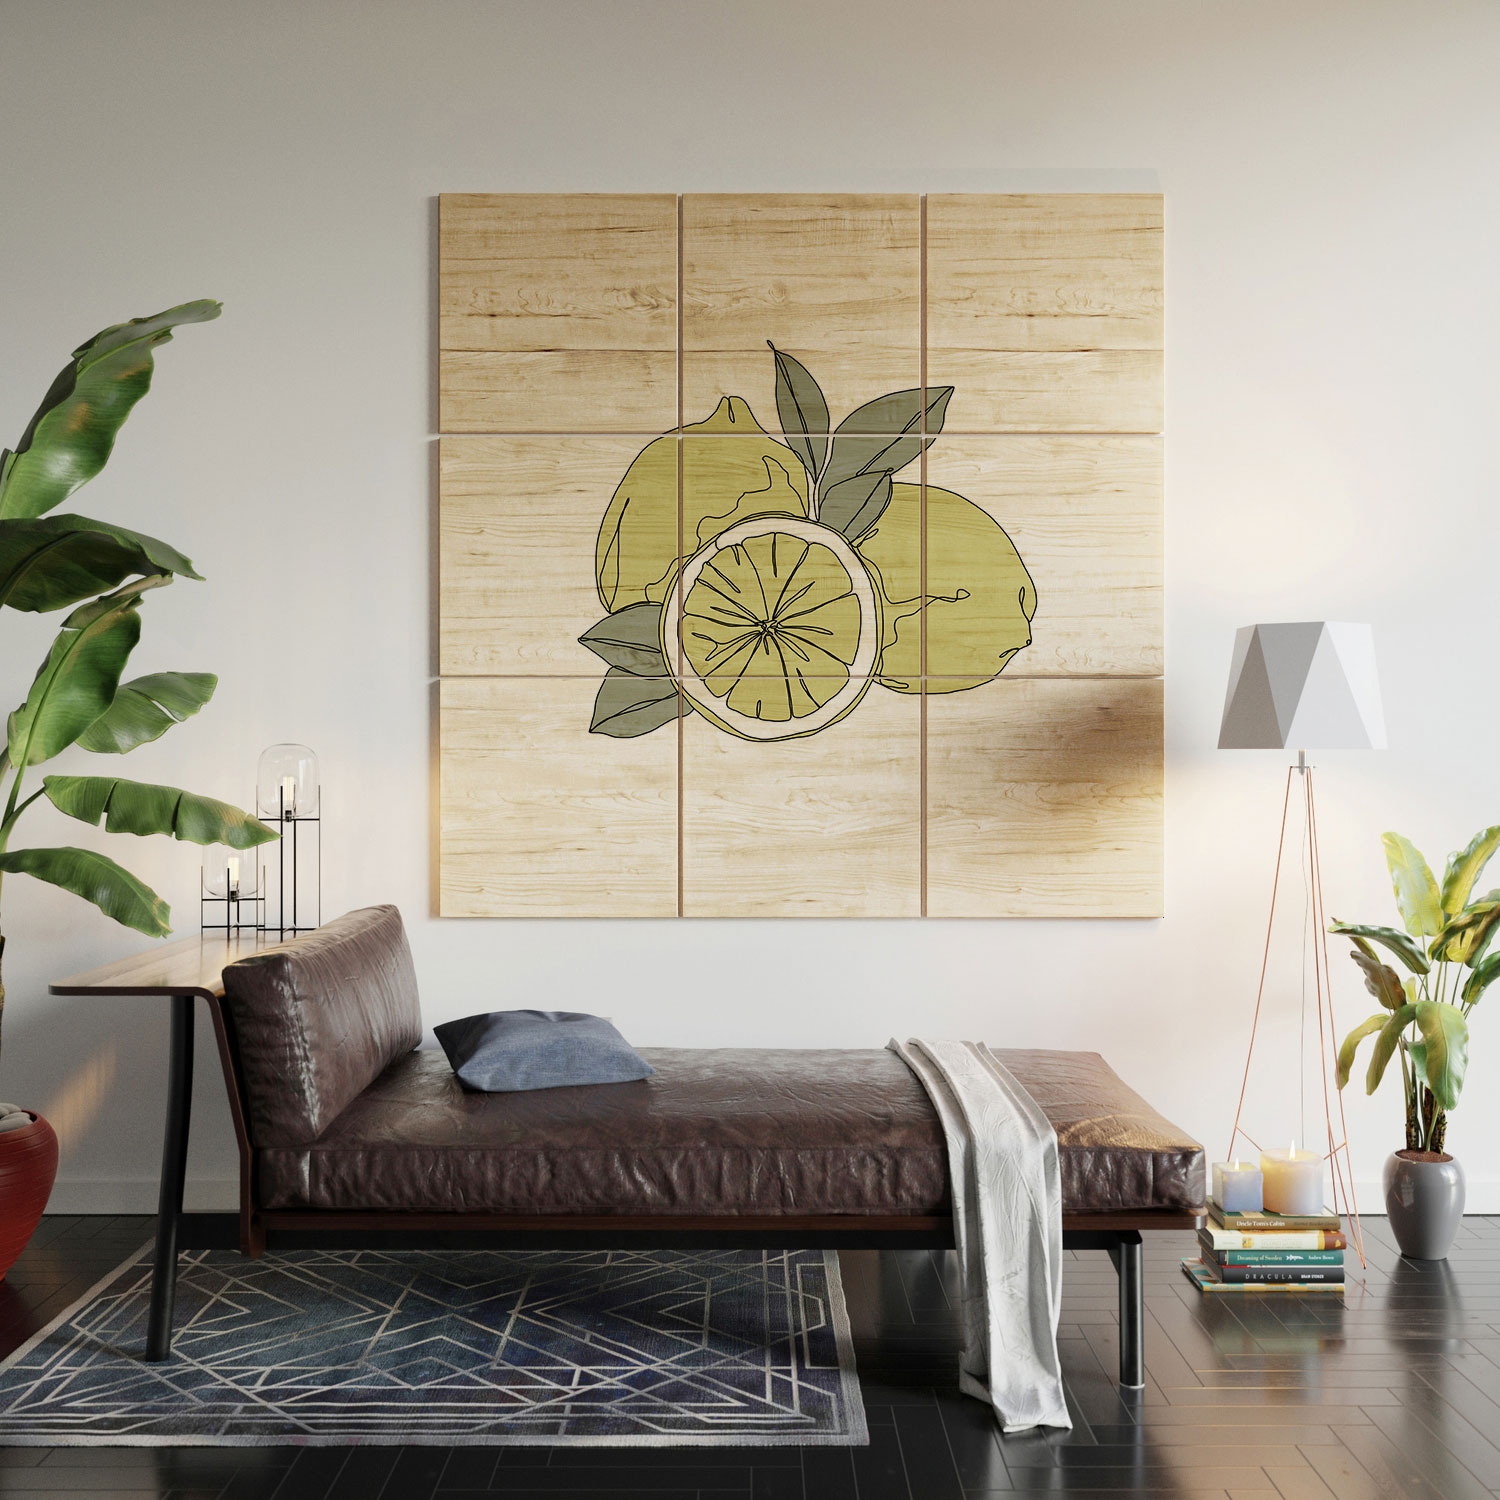 Lemons Artwork by The Colour Study - Wood Wall Mural3' X 3' (Nine 12" Wood Squares) - Image 4